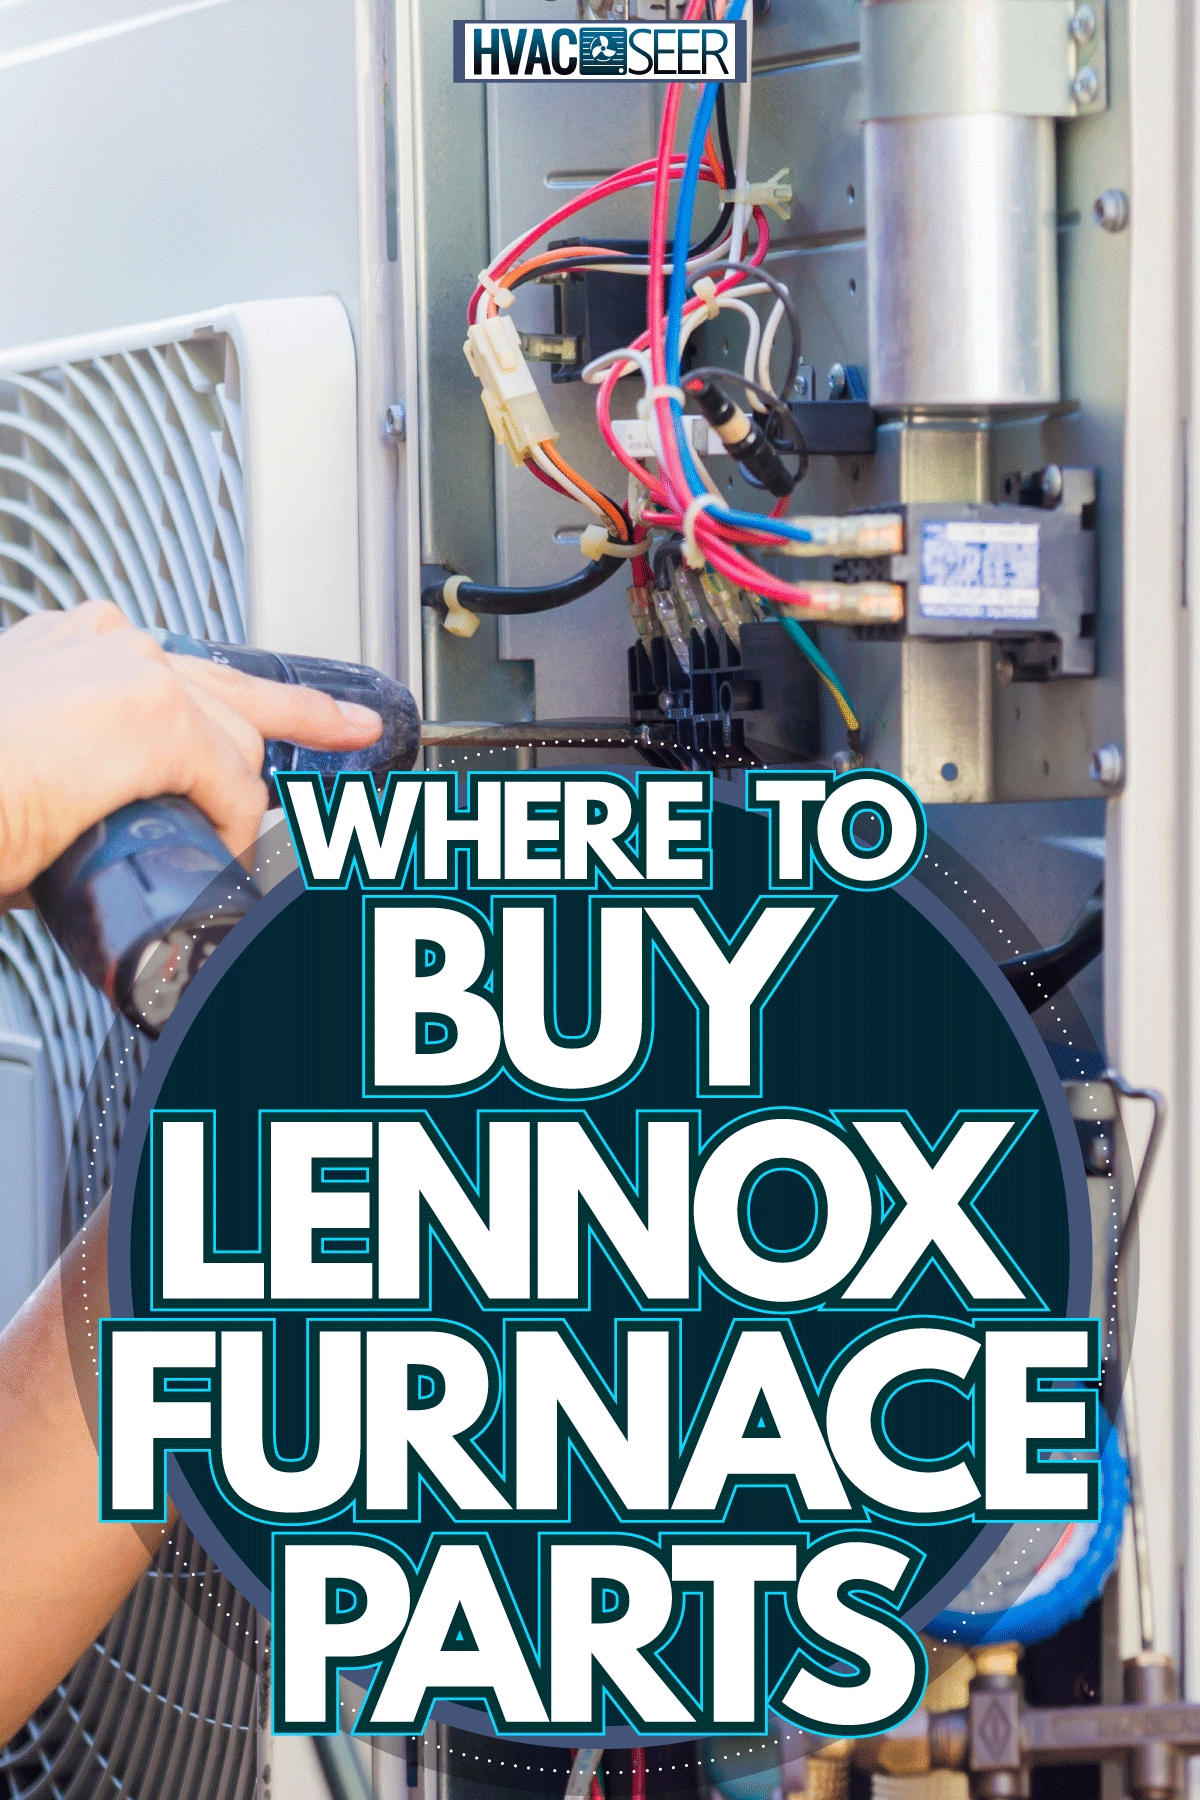 Technician checking the furnace for any problems, Where To Buy Lennox Furnace Partsa